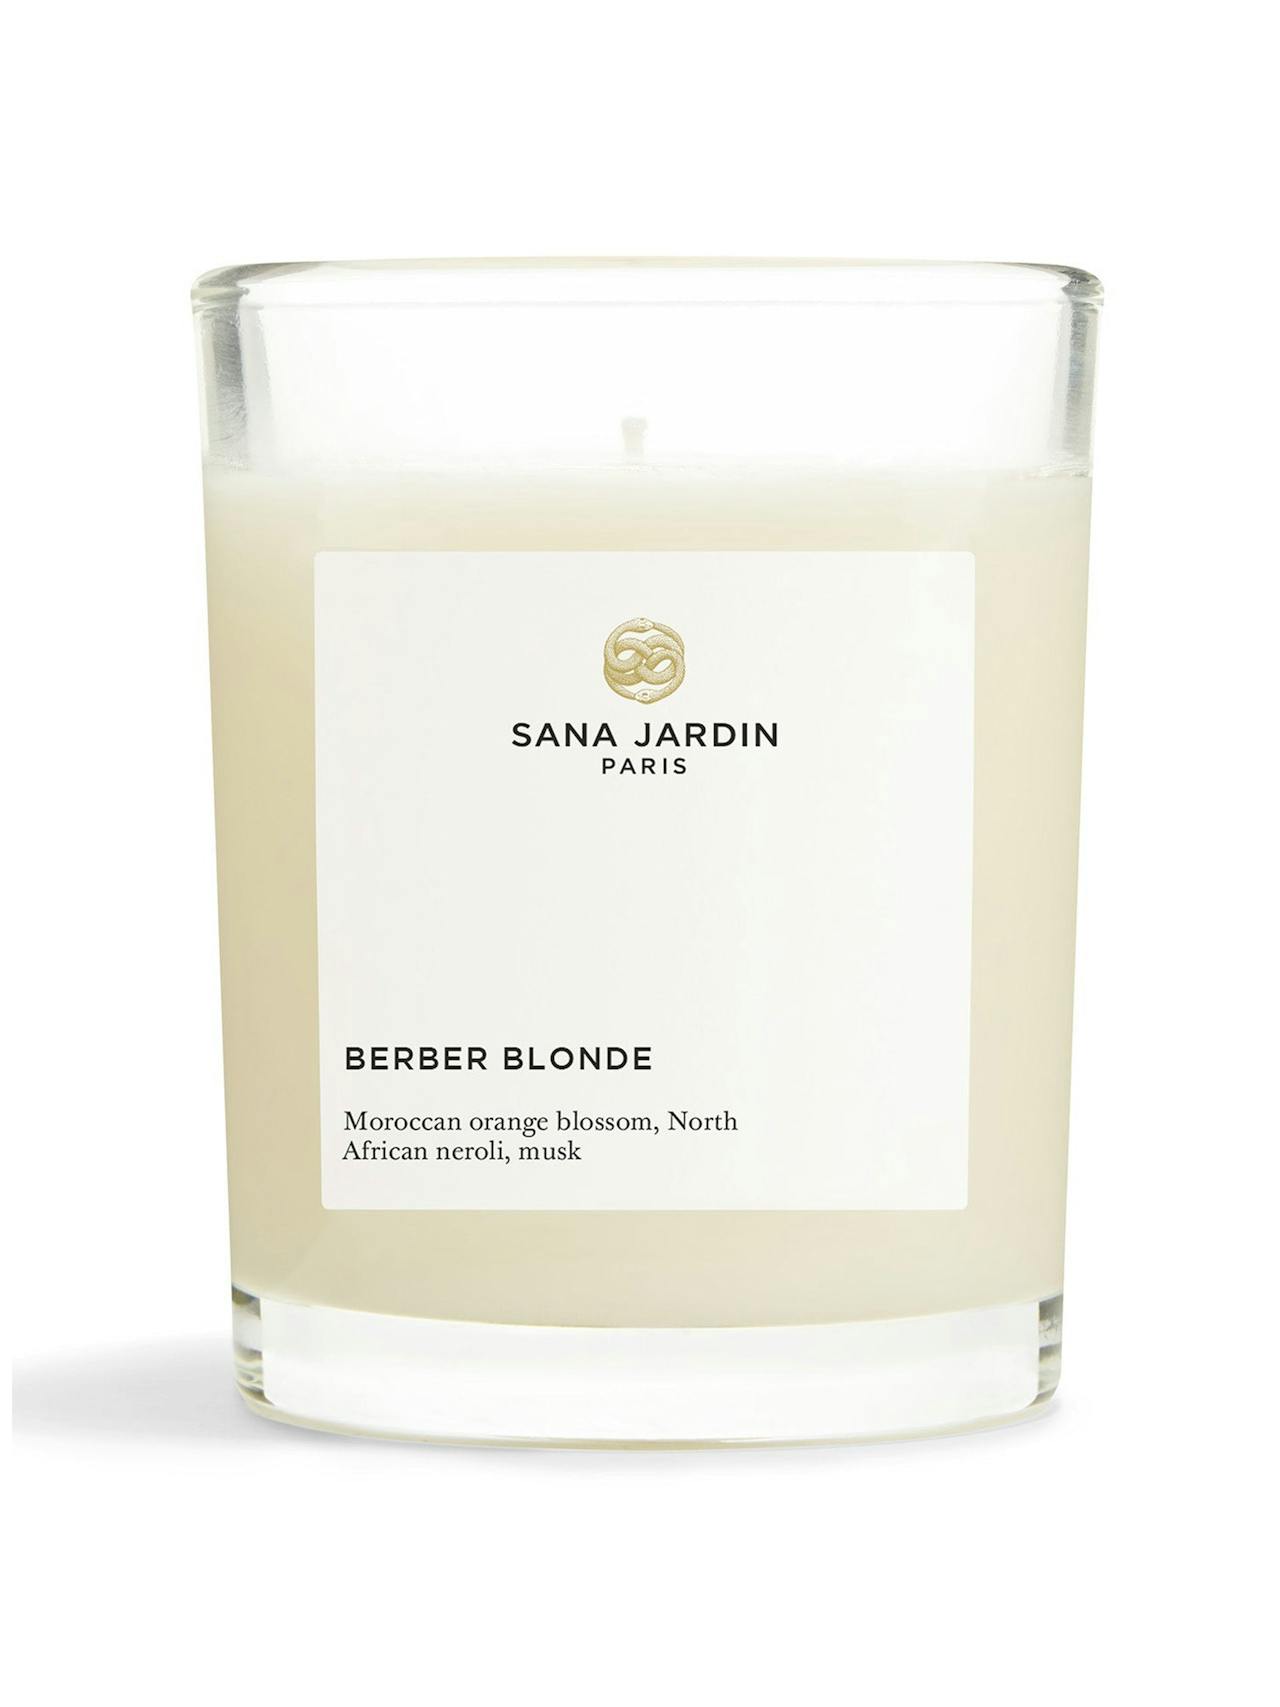 Berber blonde scented candle